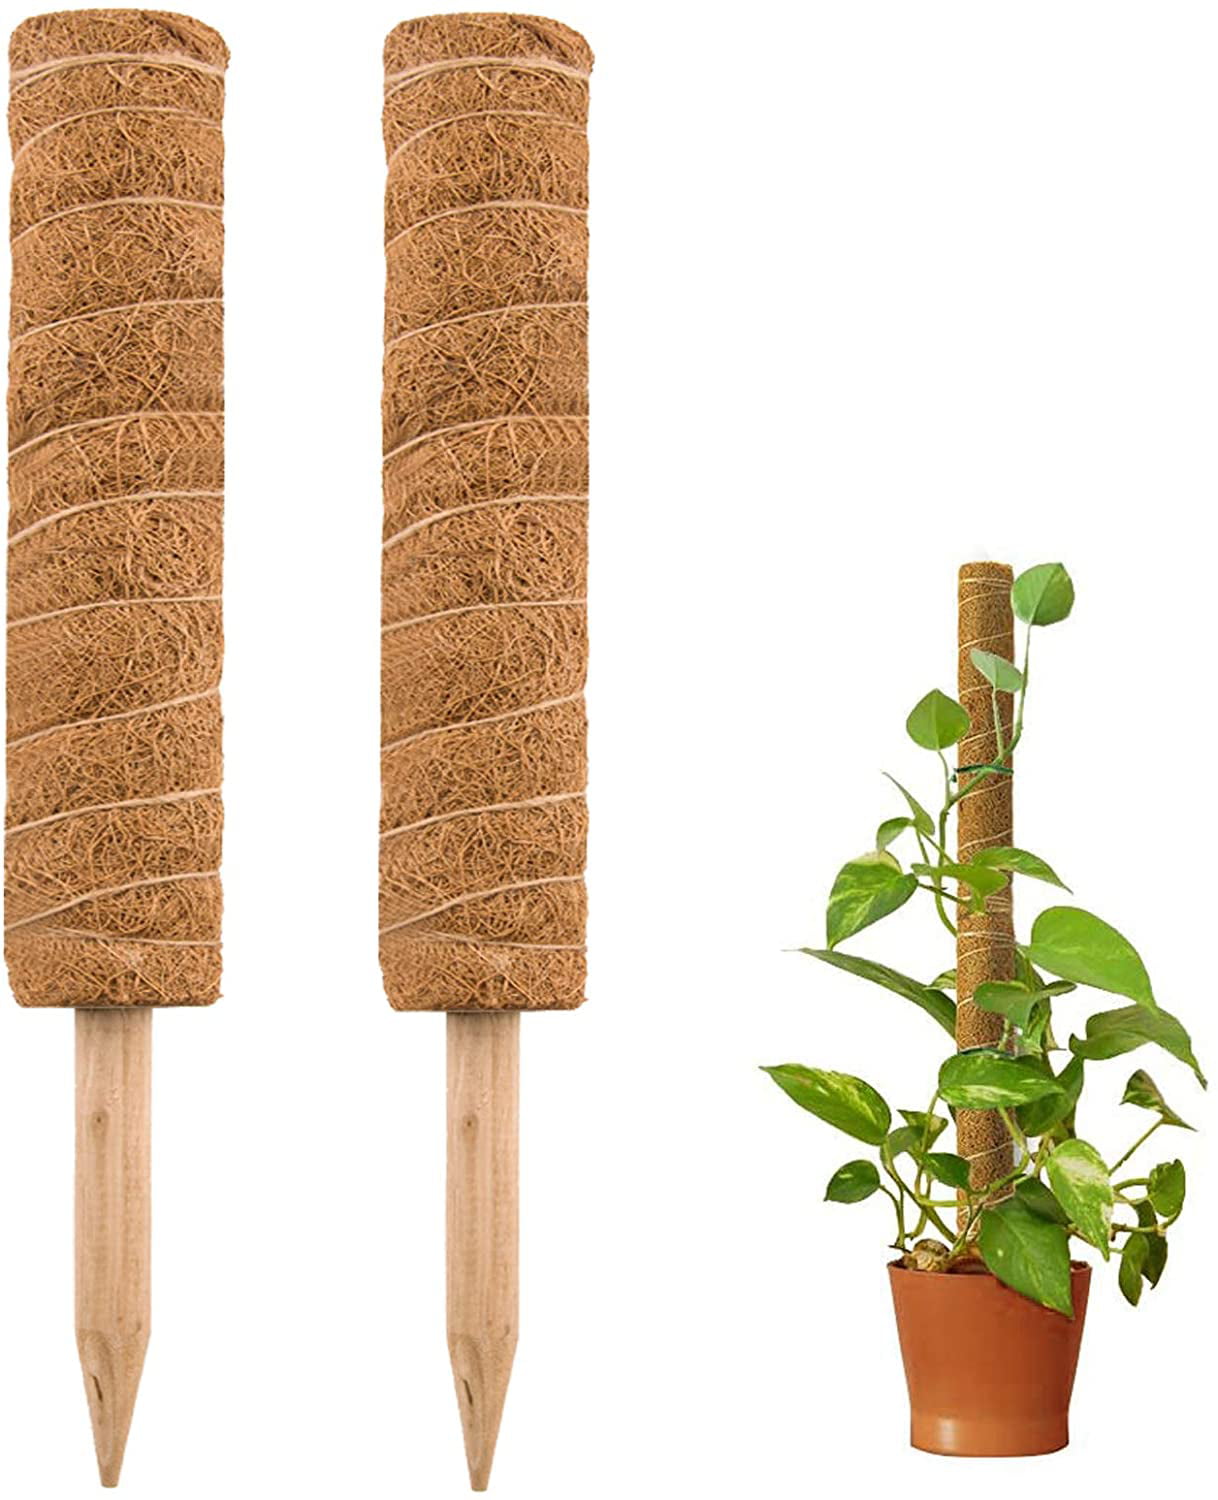 2 Blulu Coir Totem Pole 12 Inches Coir Moss Stick Coir Moss Totem Pole for Creepers Plant Support Extension Climbing Indoor Plants 